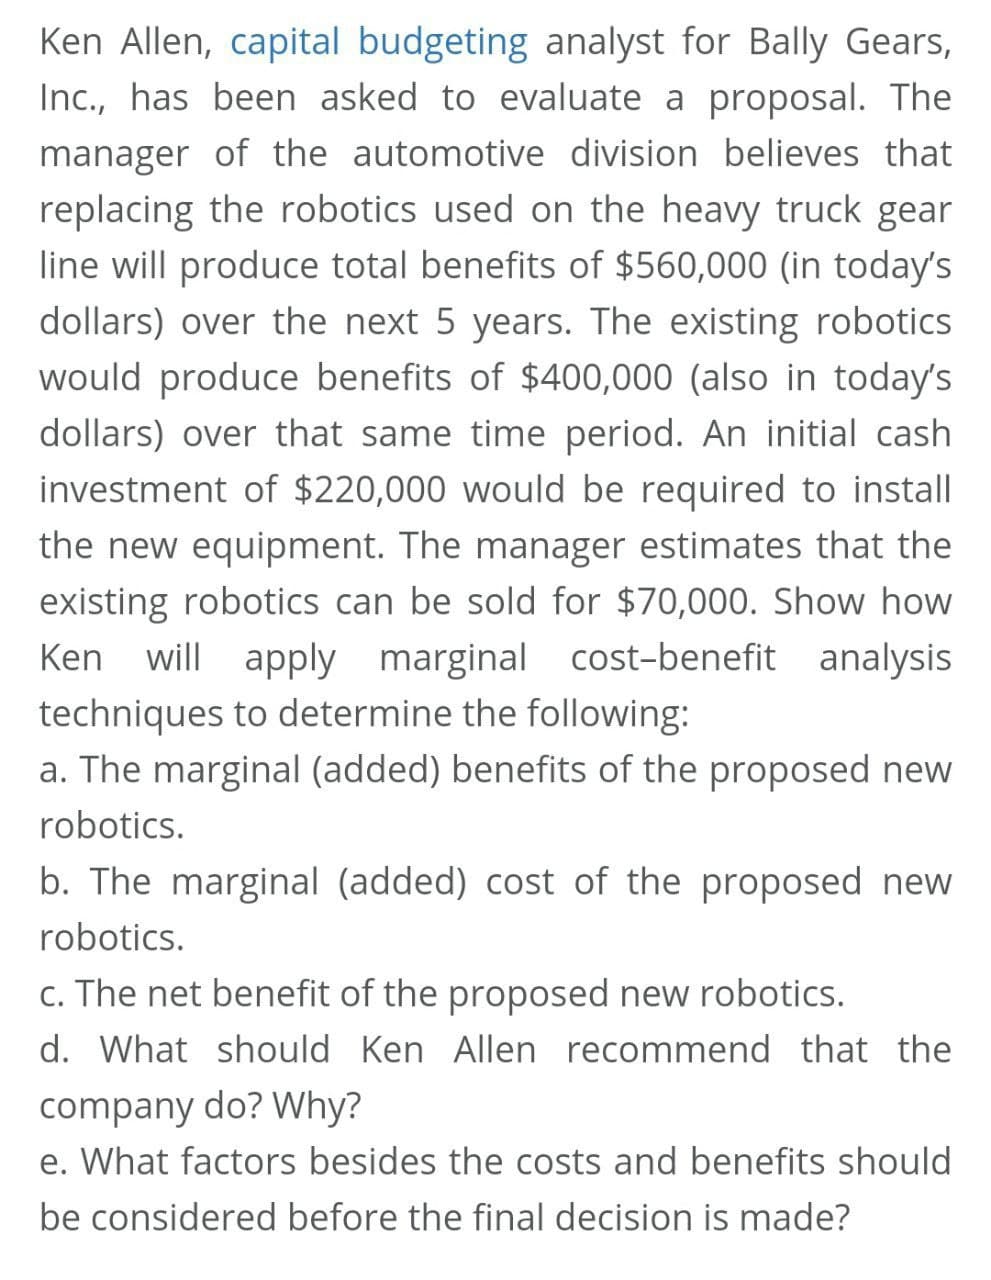 Ken Allen, capital budgeting analyst for Bally Gears,
Inc., has been asked to evaluate a proposal. The
manager of the automotive division believes that
replacing the robotics used on the heavy truck gear
line will produce total benefits of $560,000 (in today's
dollars) over the next 5 years. The existing robotics
would produce benefits of $400,000 (also in today's
dollars) over that same time period. An initial cash
investment of $220,000 would be required to install
the new equipment. The manager estimates that the
existing robotics can be sold for $70,000. Show how
Ken will apply marginal cost-benefit analysis
techniques to determine the following:
a. The marginal (added) benefits of the proposed new
robotics.
b. The marginal (added) cost of the proposed new
robotics.
c. The net benefit of the proposed new robotics.
d. What should Ken Allen recommend that the
company do? Why?
e. What factors besides the costs and benefits should
be considered before the final decision is made?
